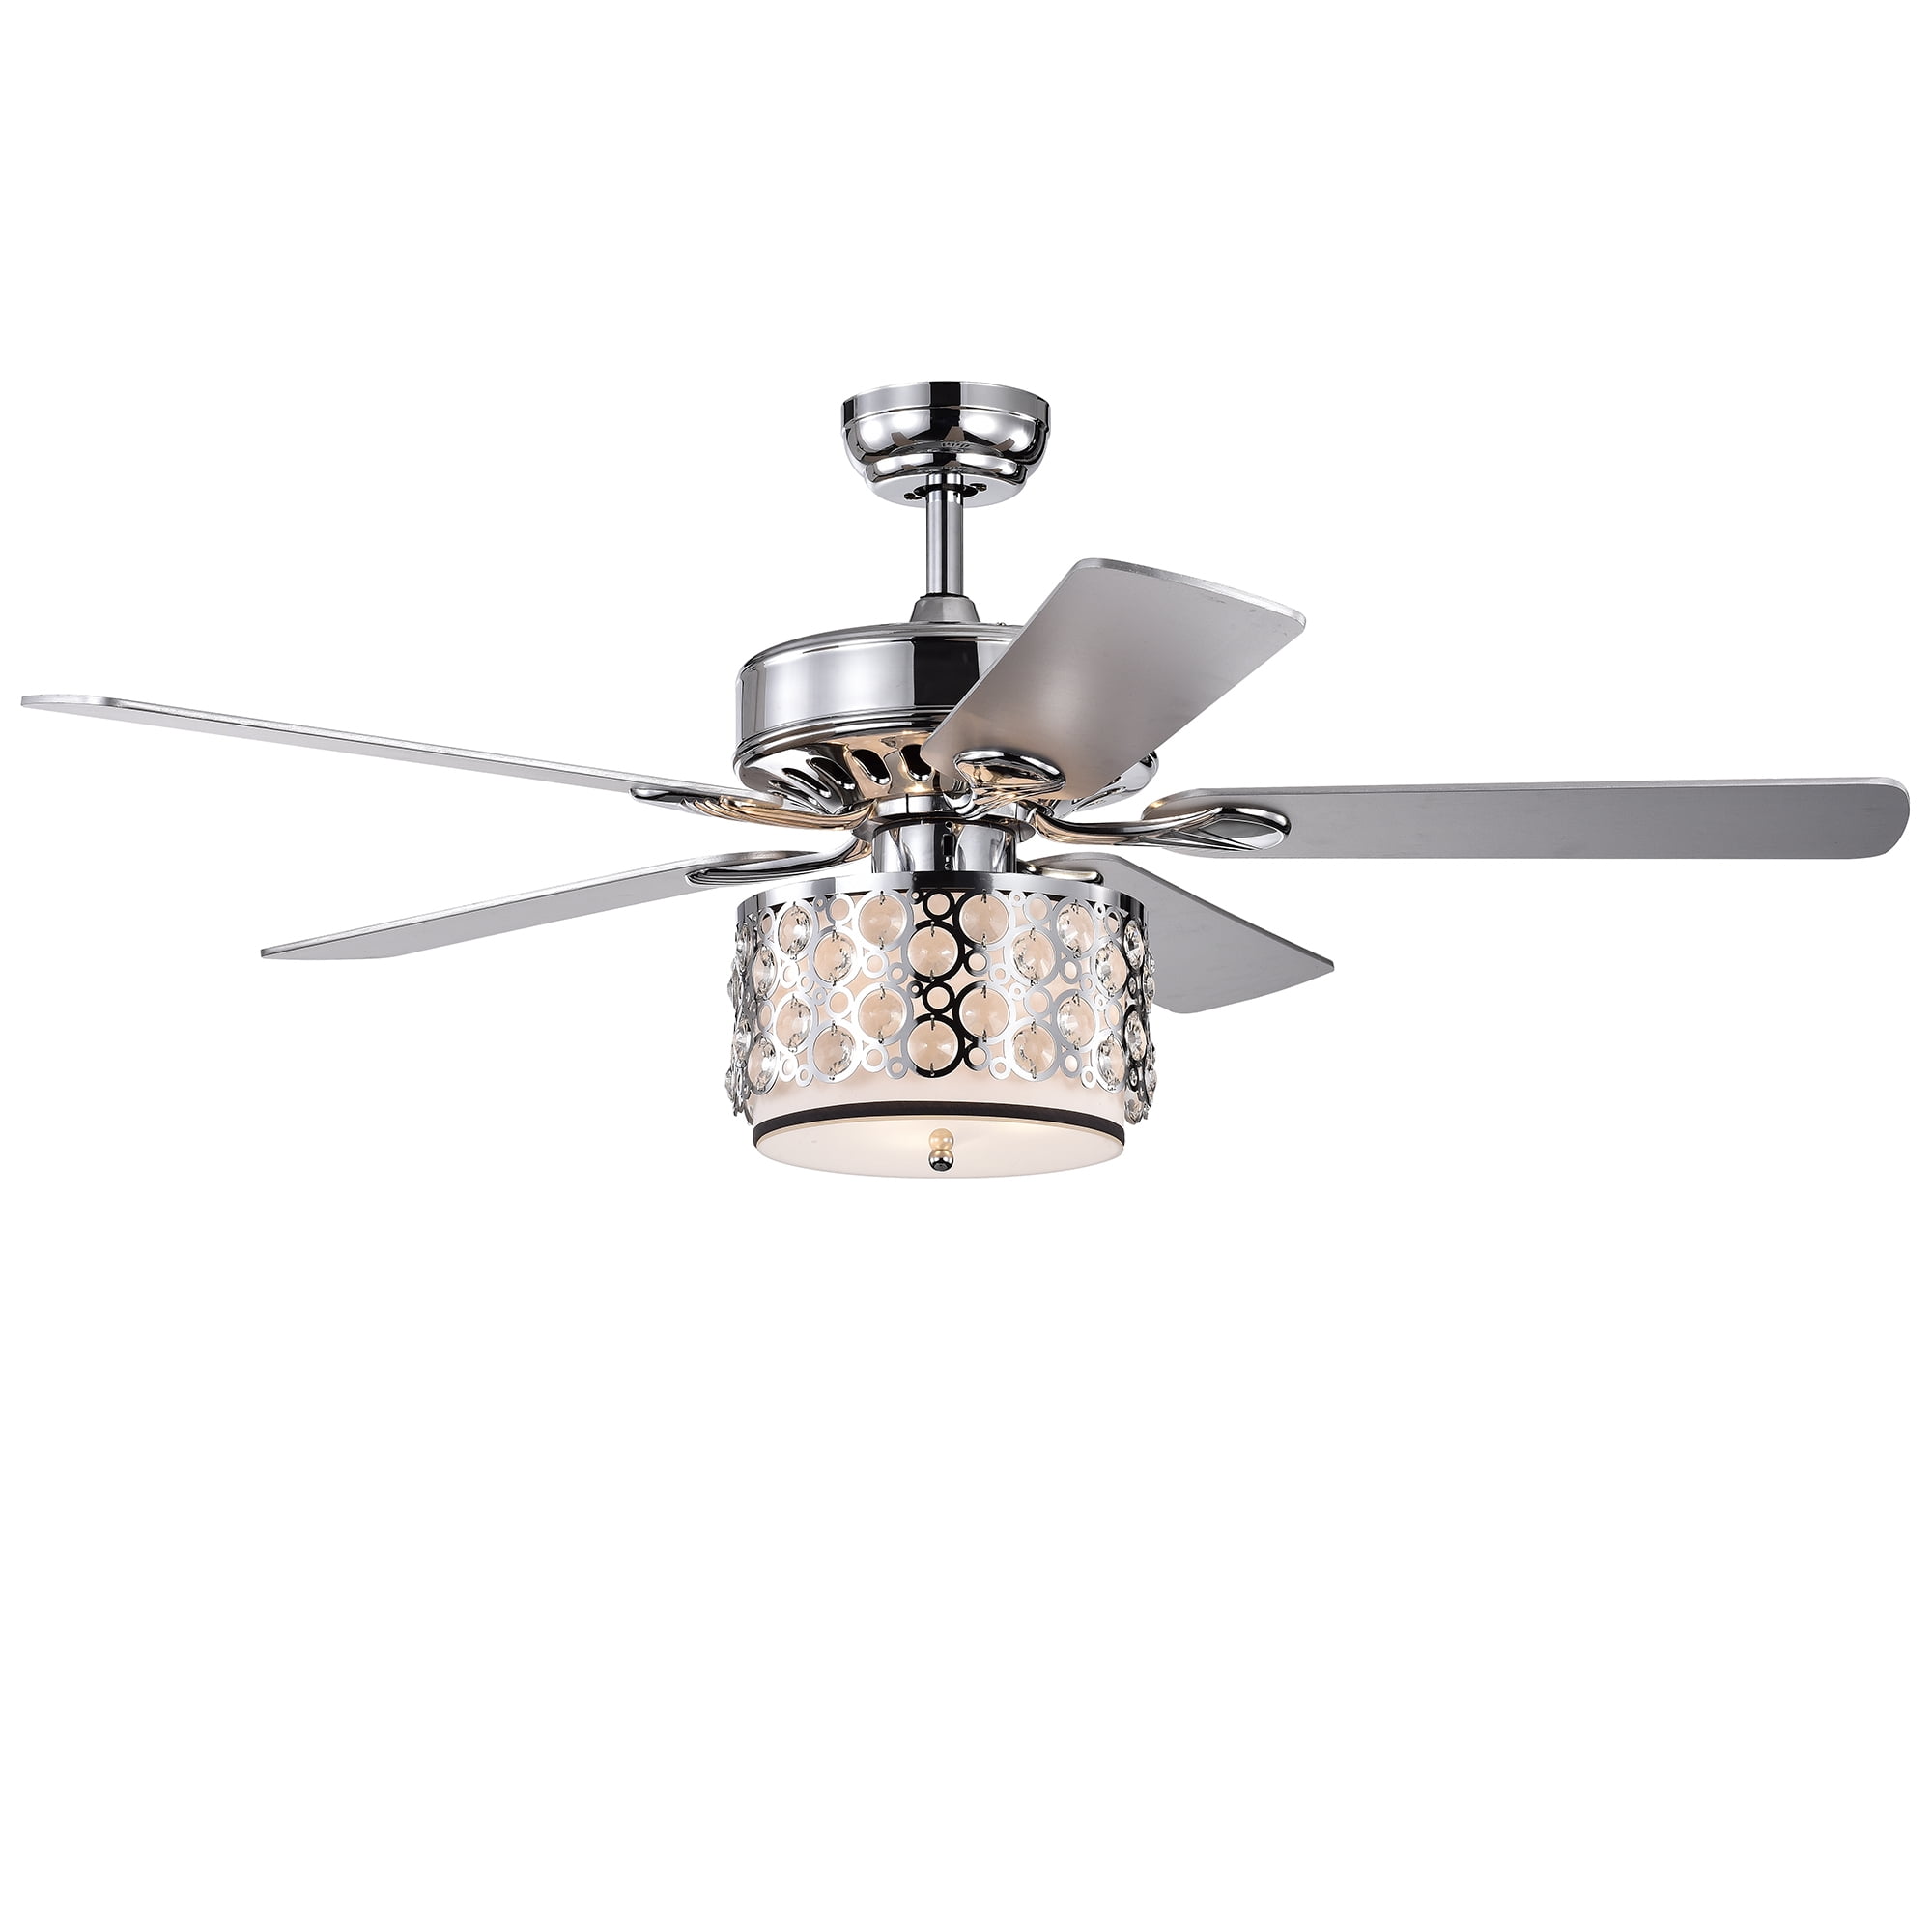 Shepherd 52-Inch 5-Blade Lighted Ceiling Fan with Chrome and Glass Shade (includes Remote and Lighti Kit)